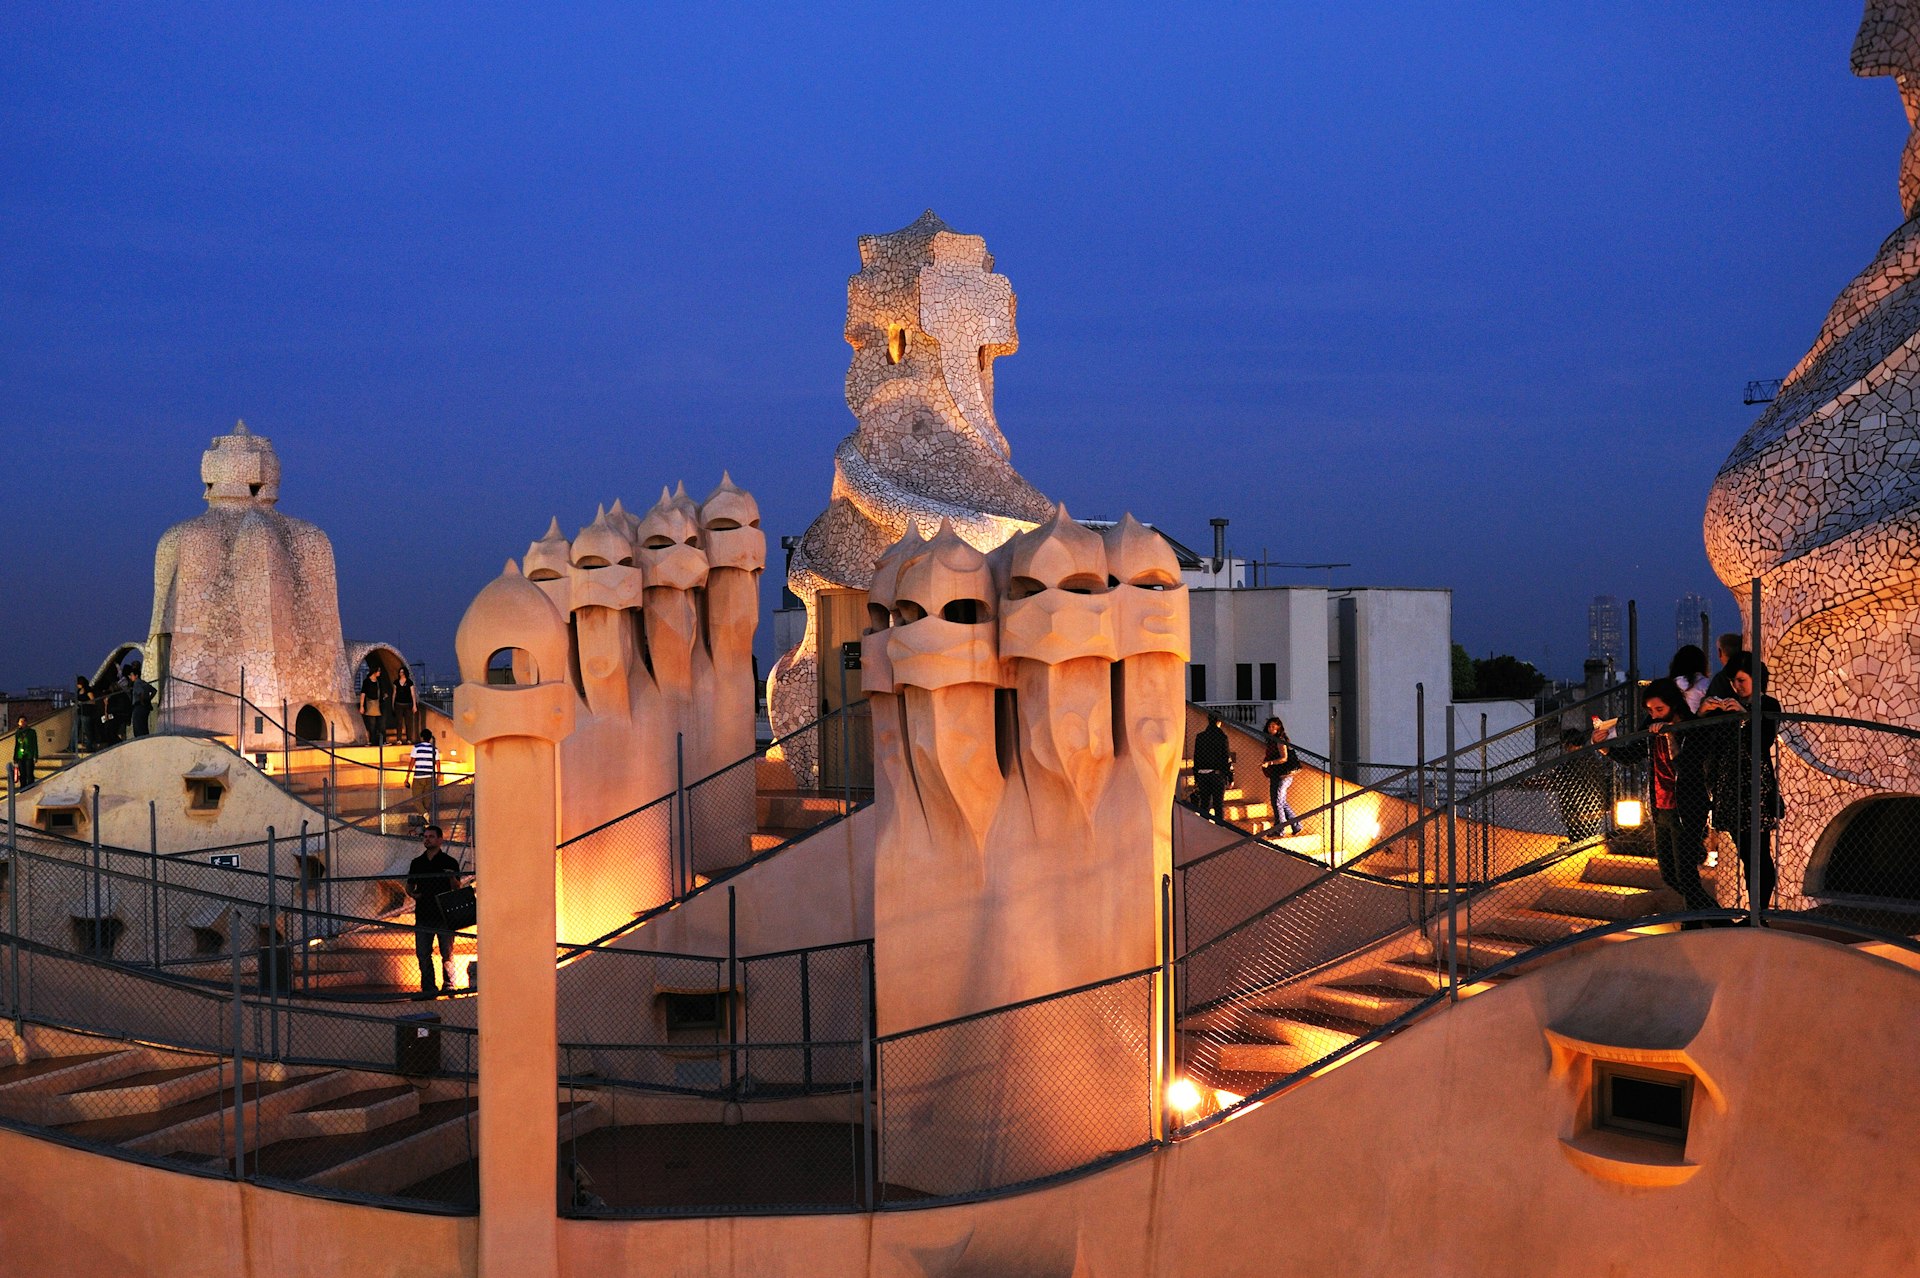 A night view at the roof of "La Pedrera" building in Barcelona